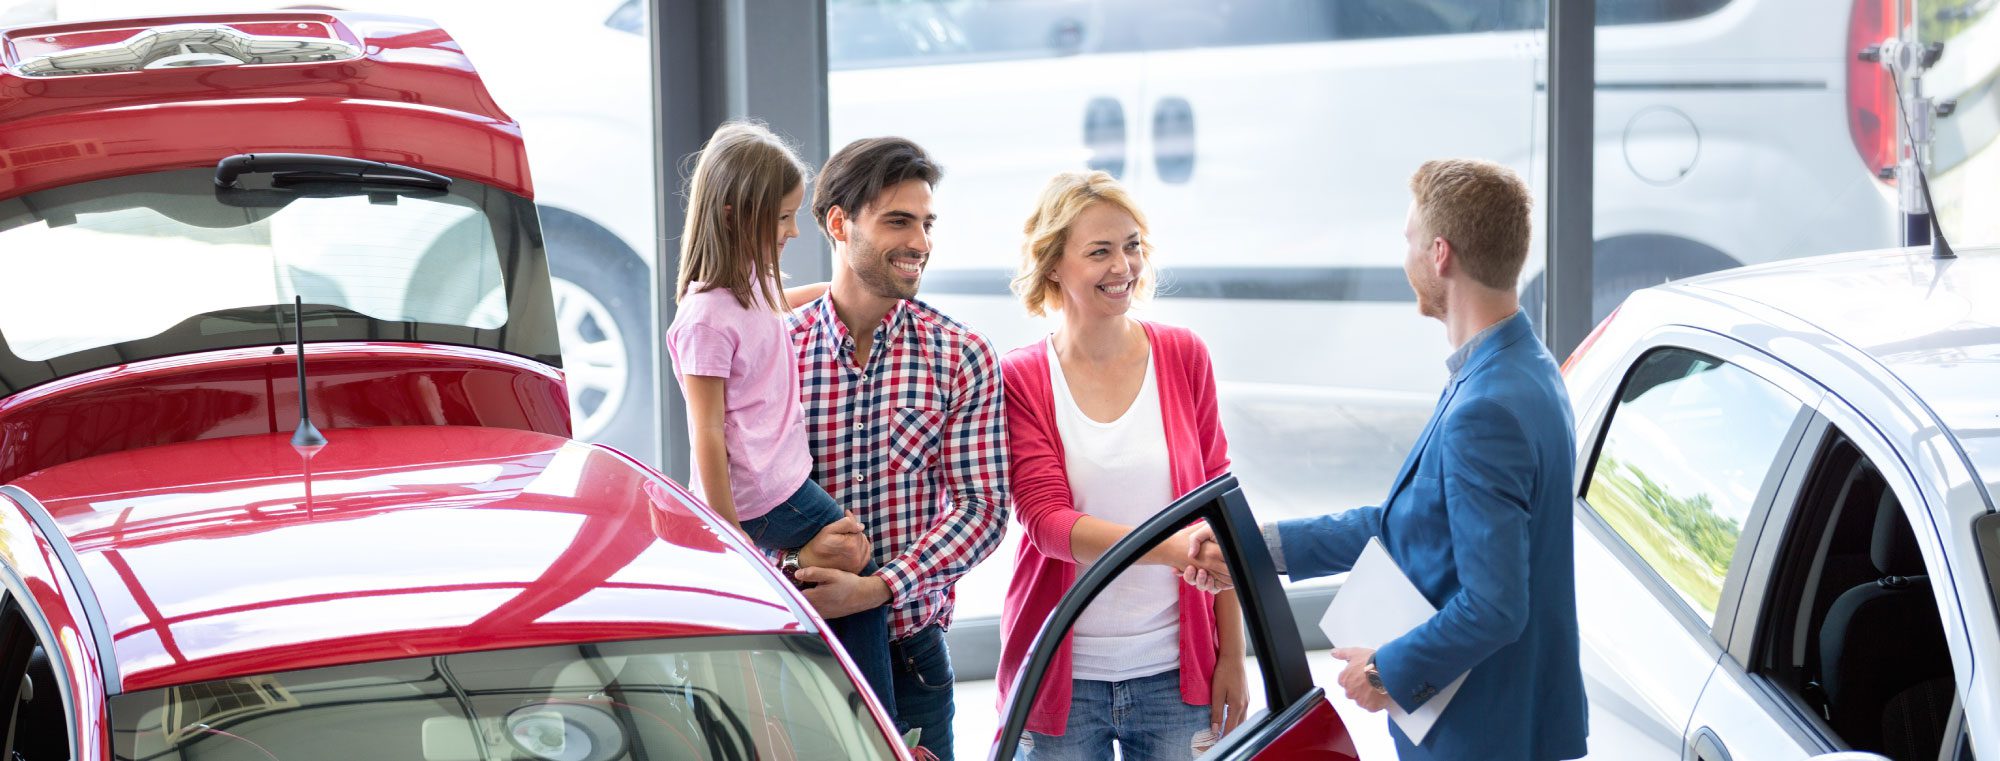 The Changing Role of the Automotive Salesperson